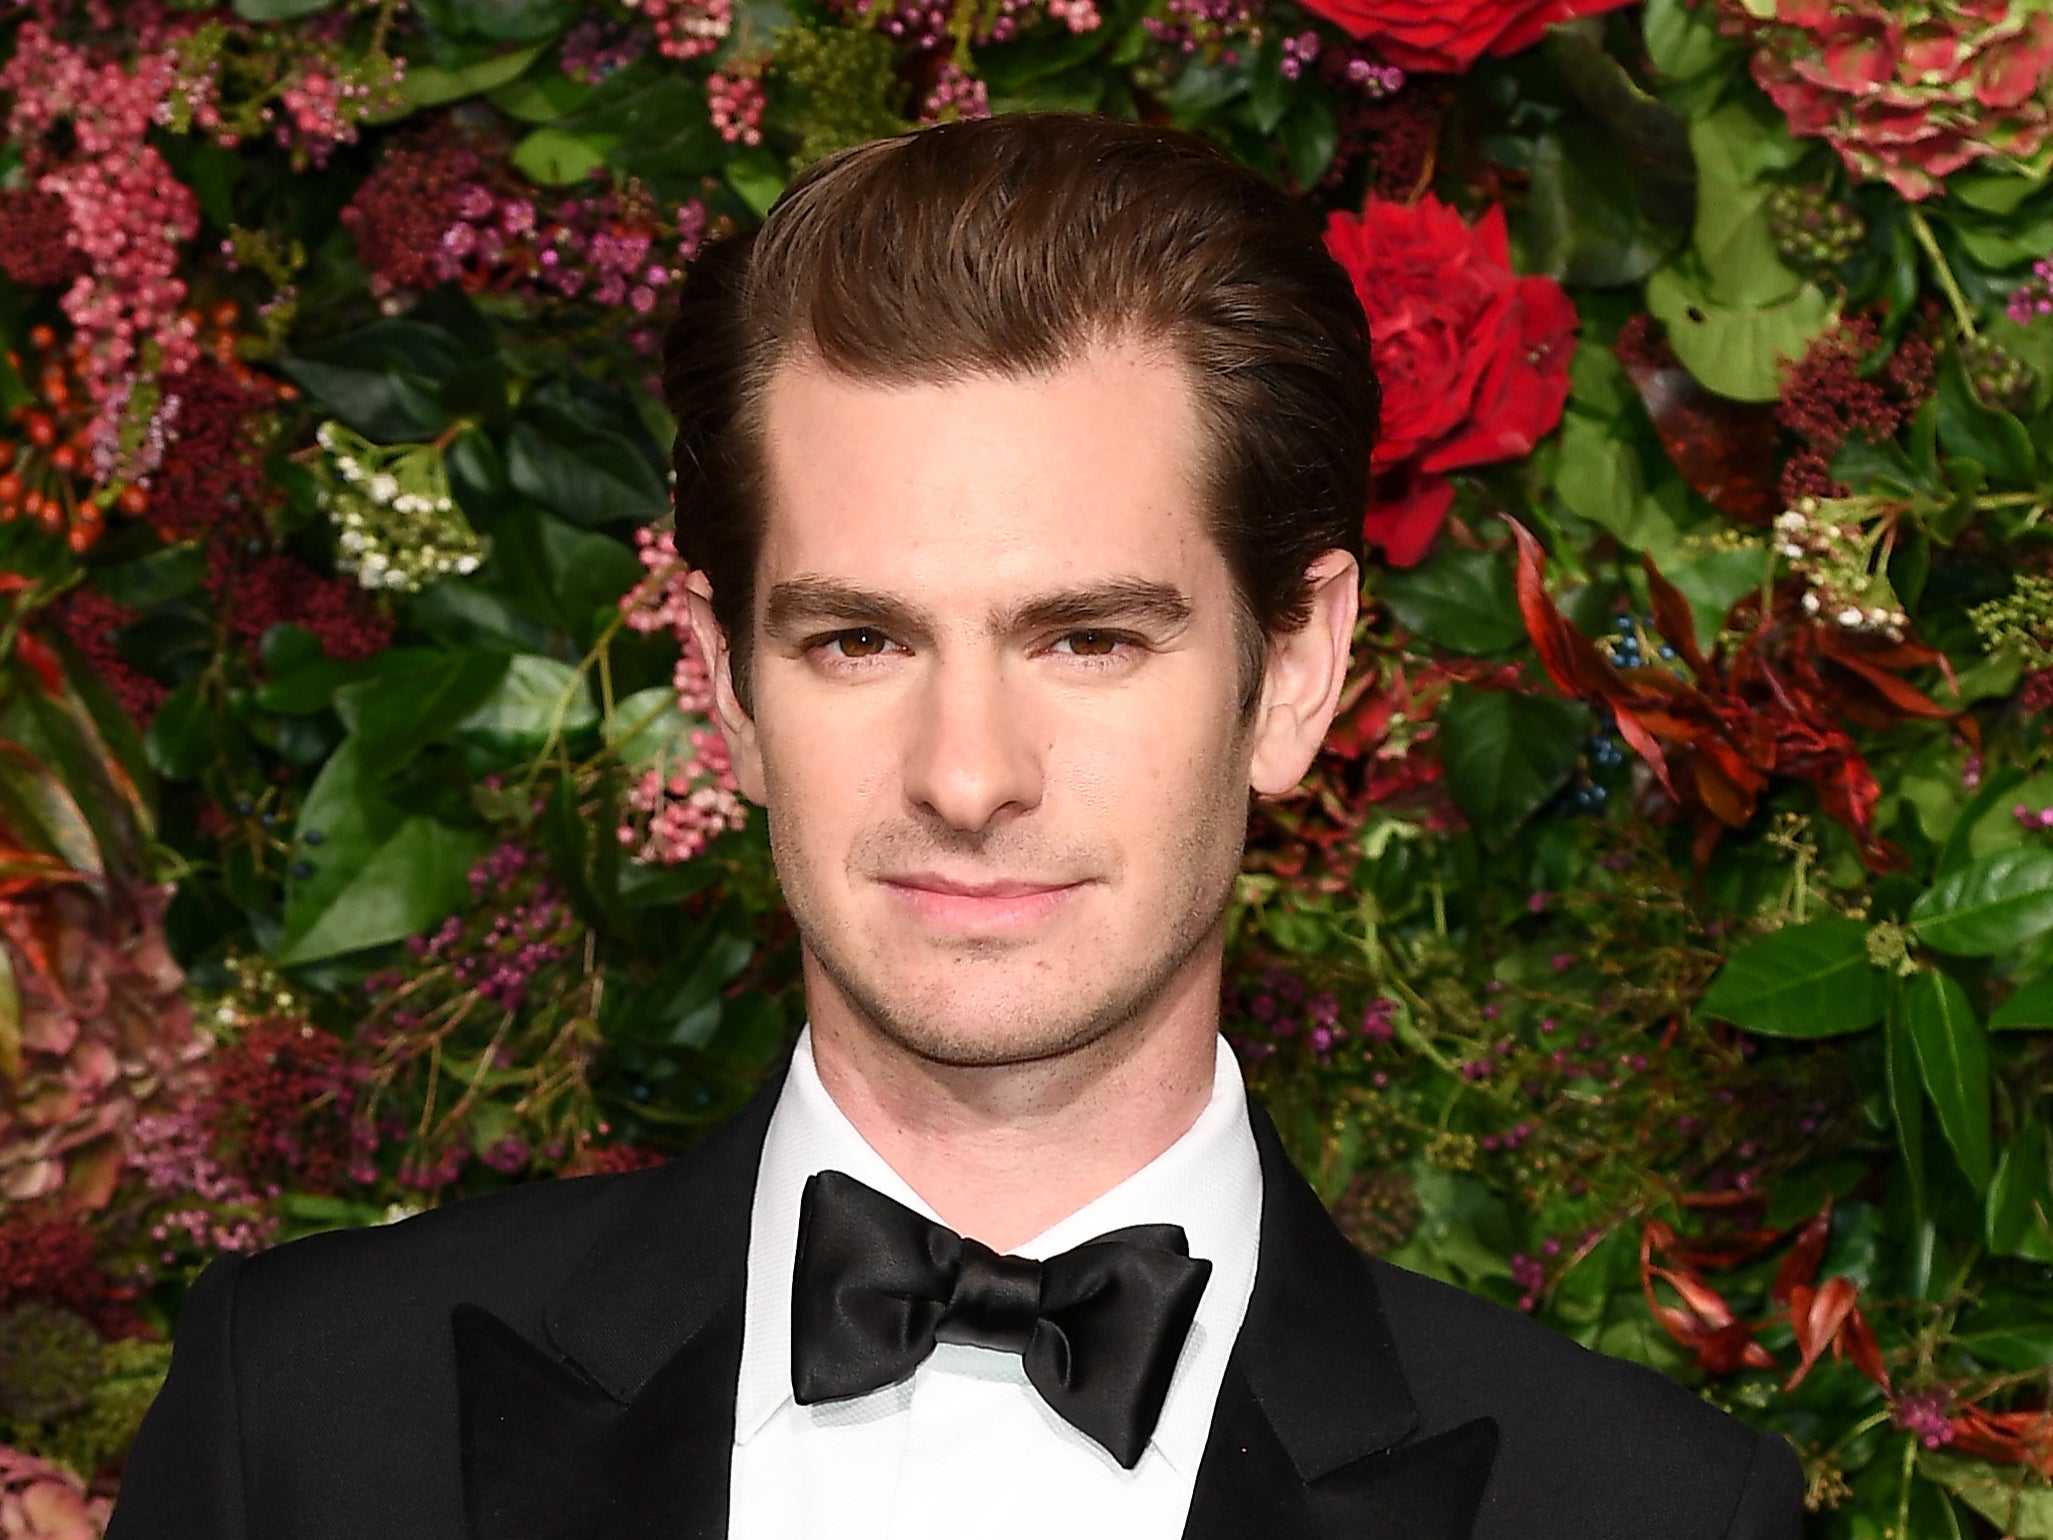 Andrew Garfield opened up about his struggles after being cast as Spider-Man